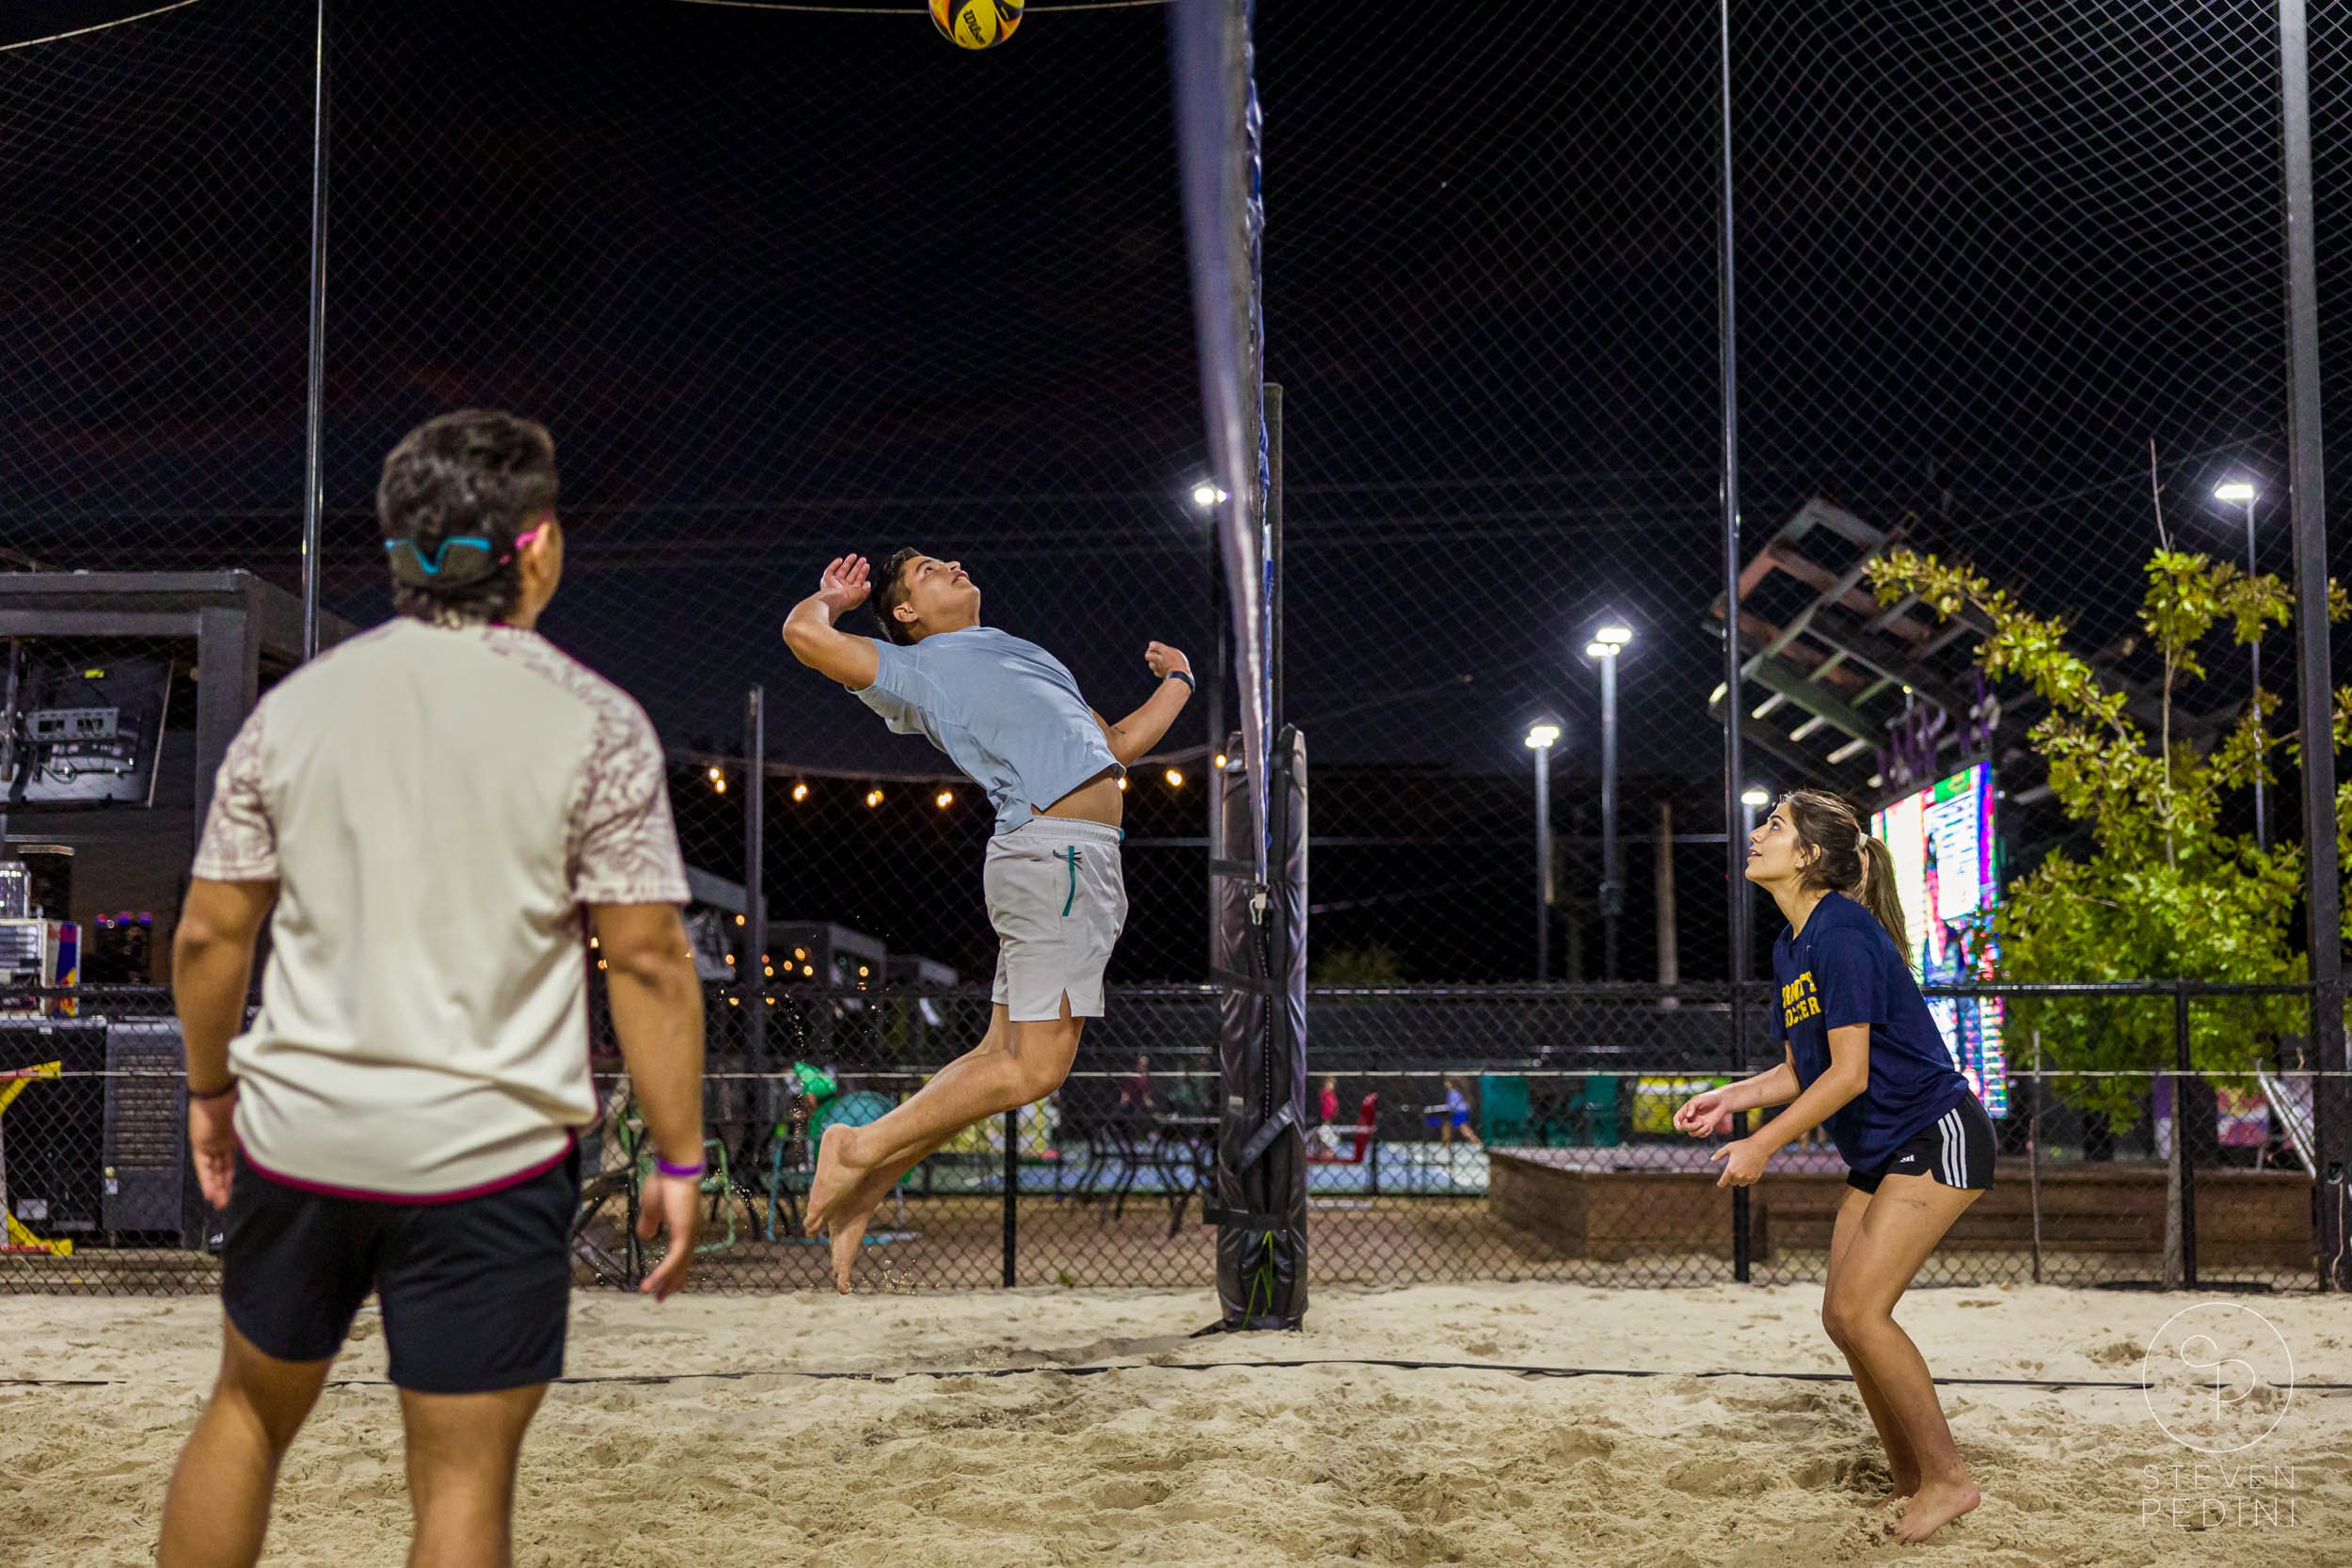 Steven Pedini Photography - Bumpy Pickle - Sand Volleyball - Houston TX - World Cup of Volleyball - 00387.jpg